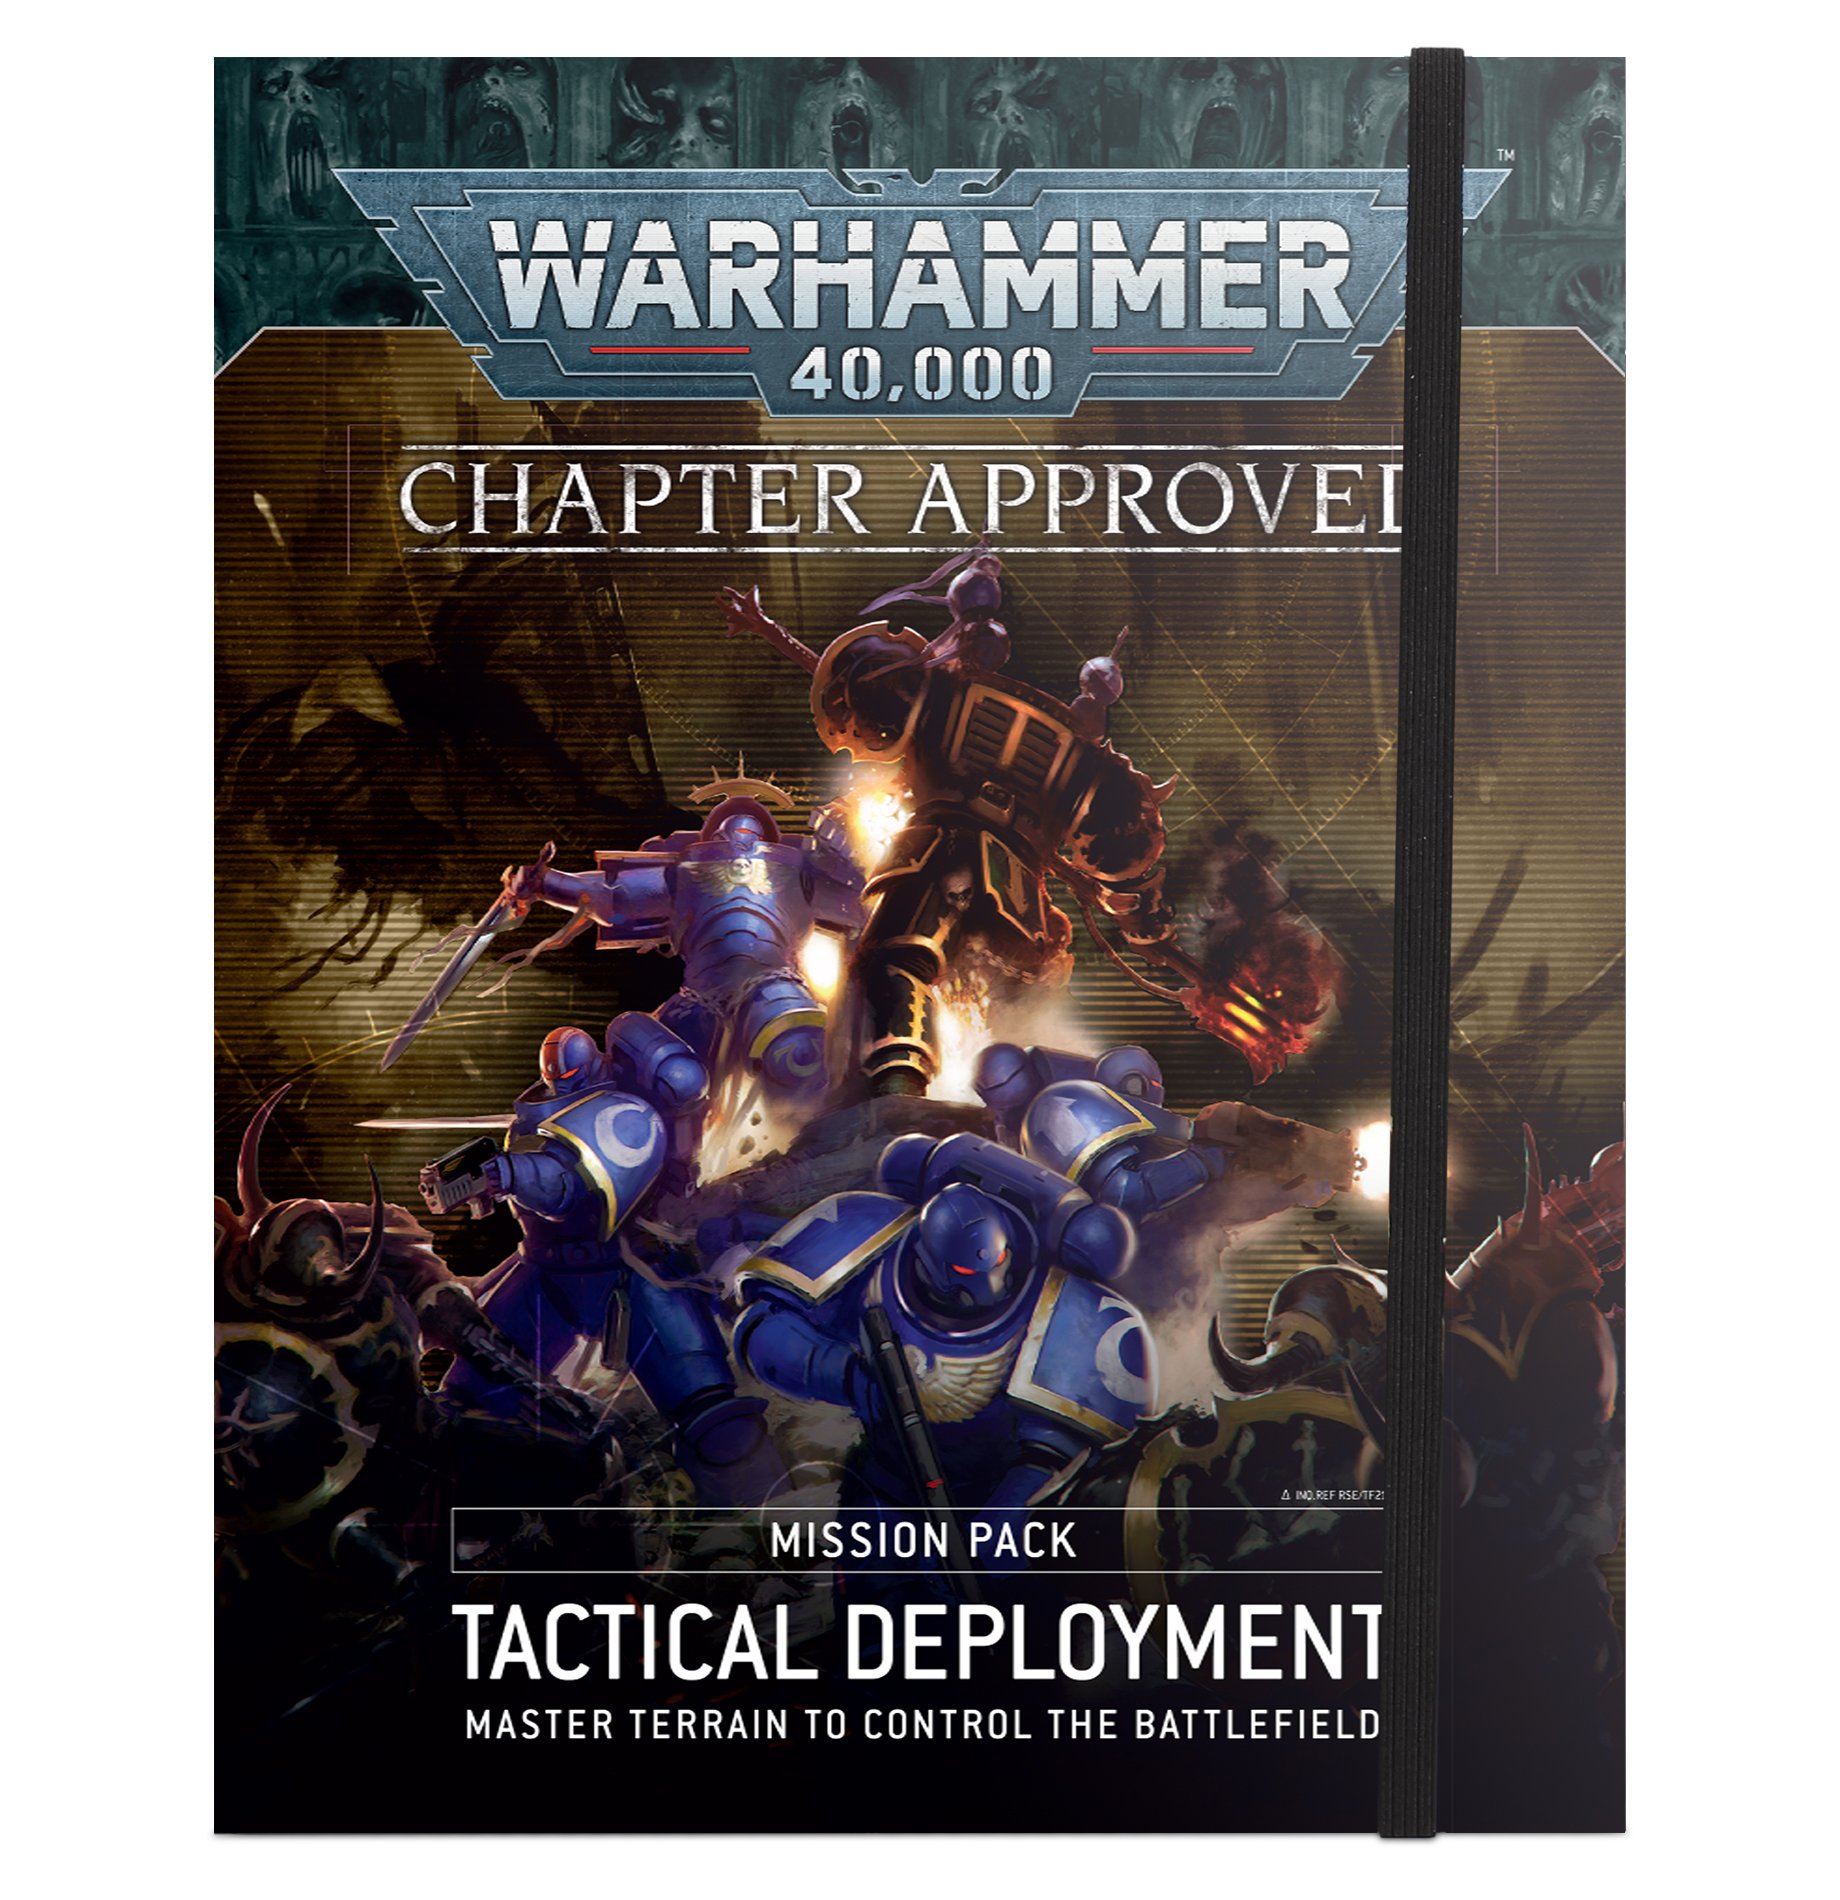 Warhammer 40,000 Chapter Approved Mission Pack Tactical Deployment